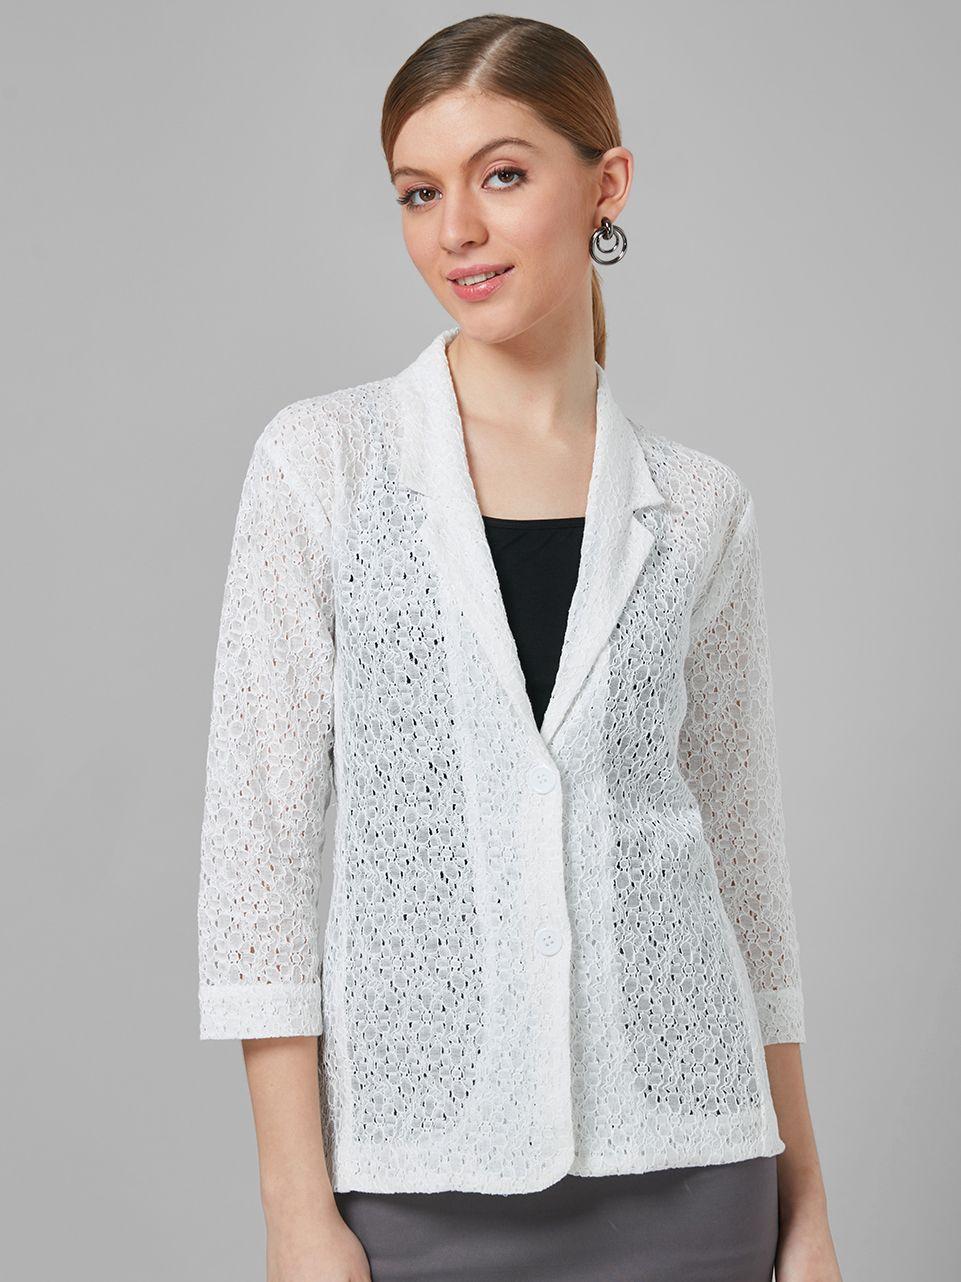 style-quotient-women-self-design-floral-lace-tailored-smart-casual-jacket